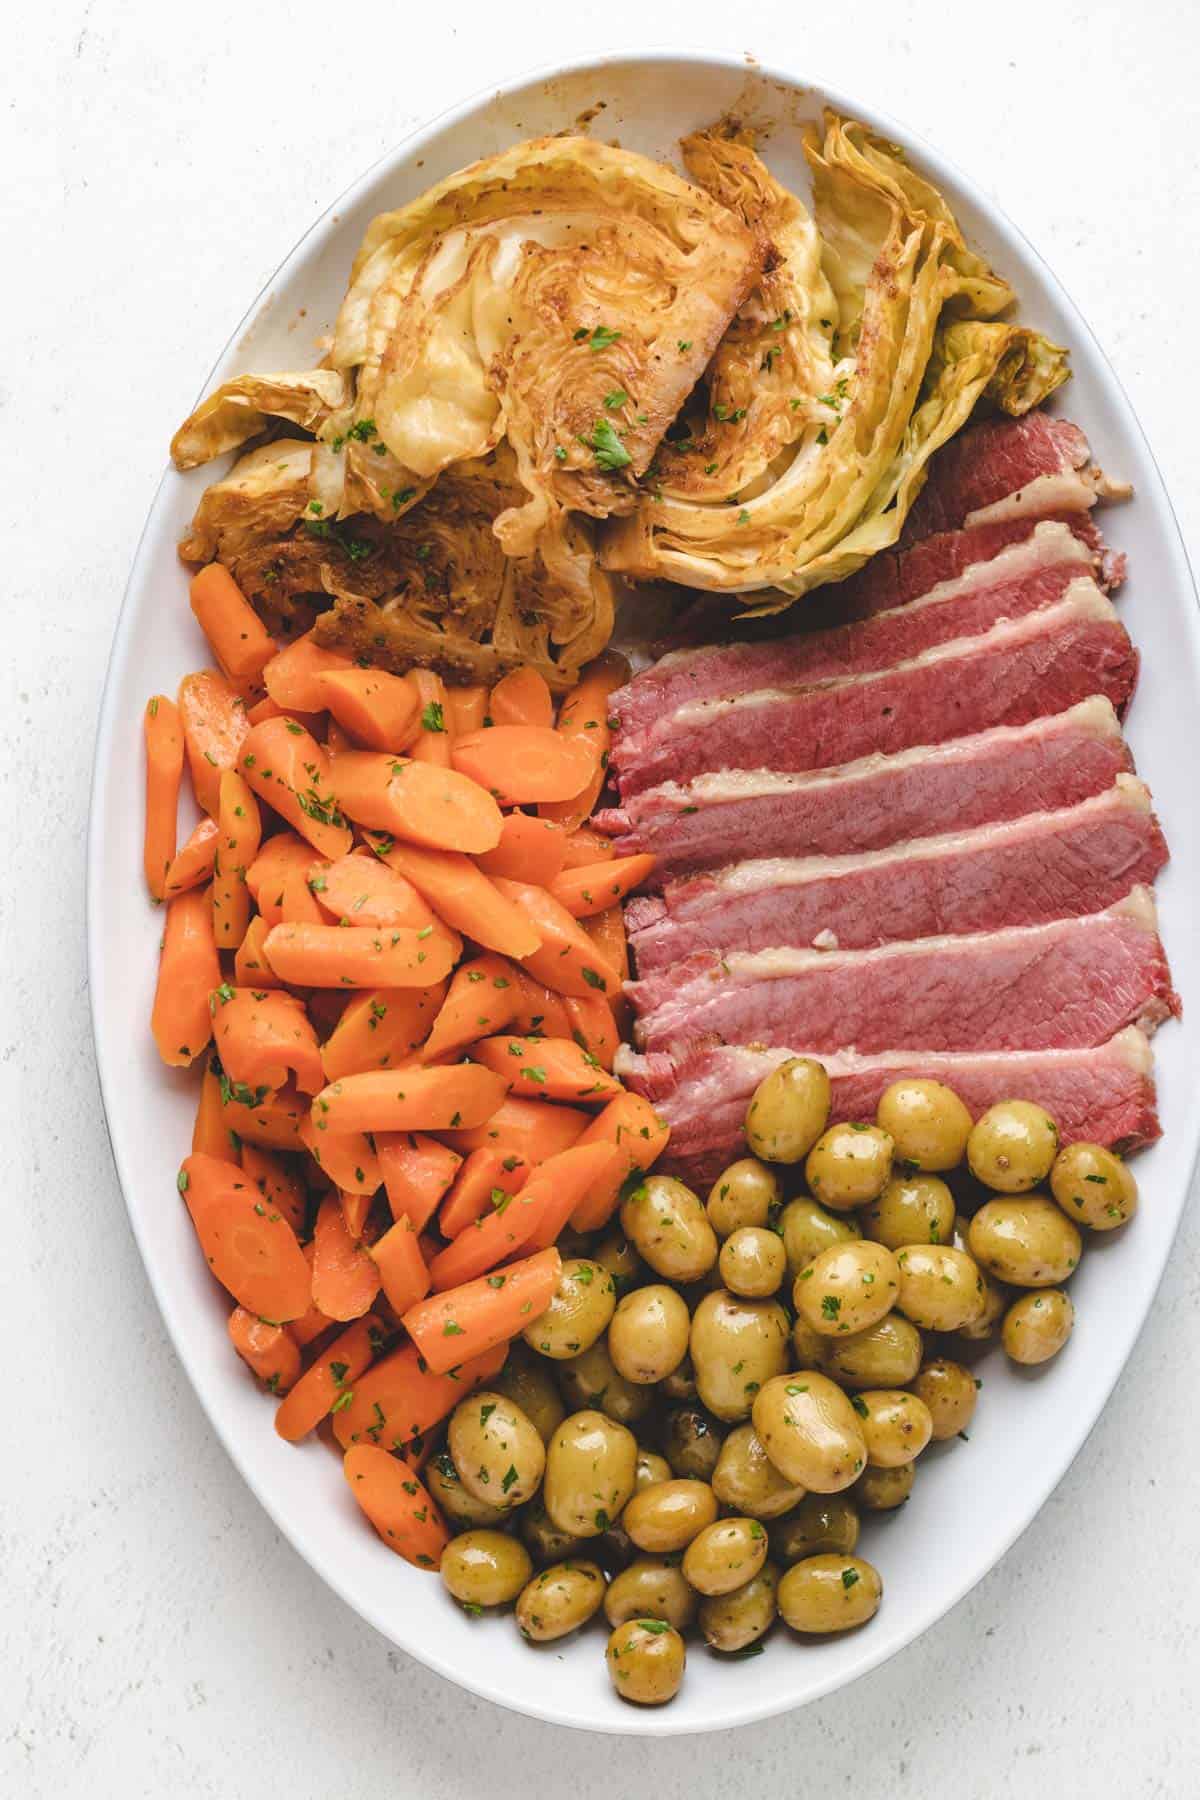 Sous vide corned beef, potatoes, carrots, and cabbage on a serving platter.